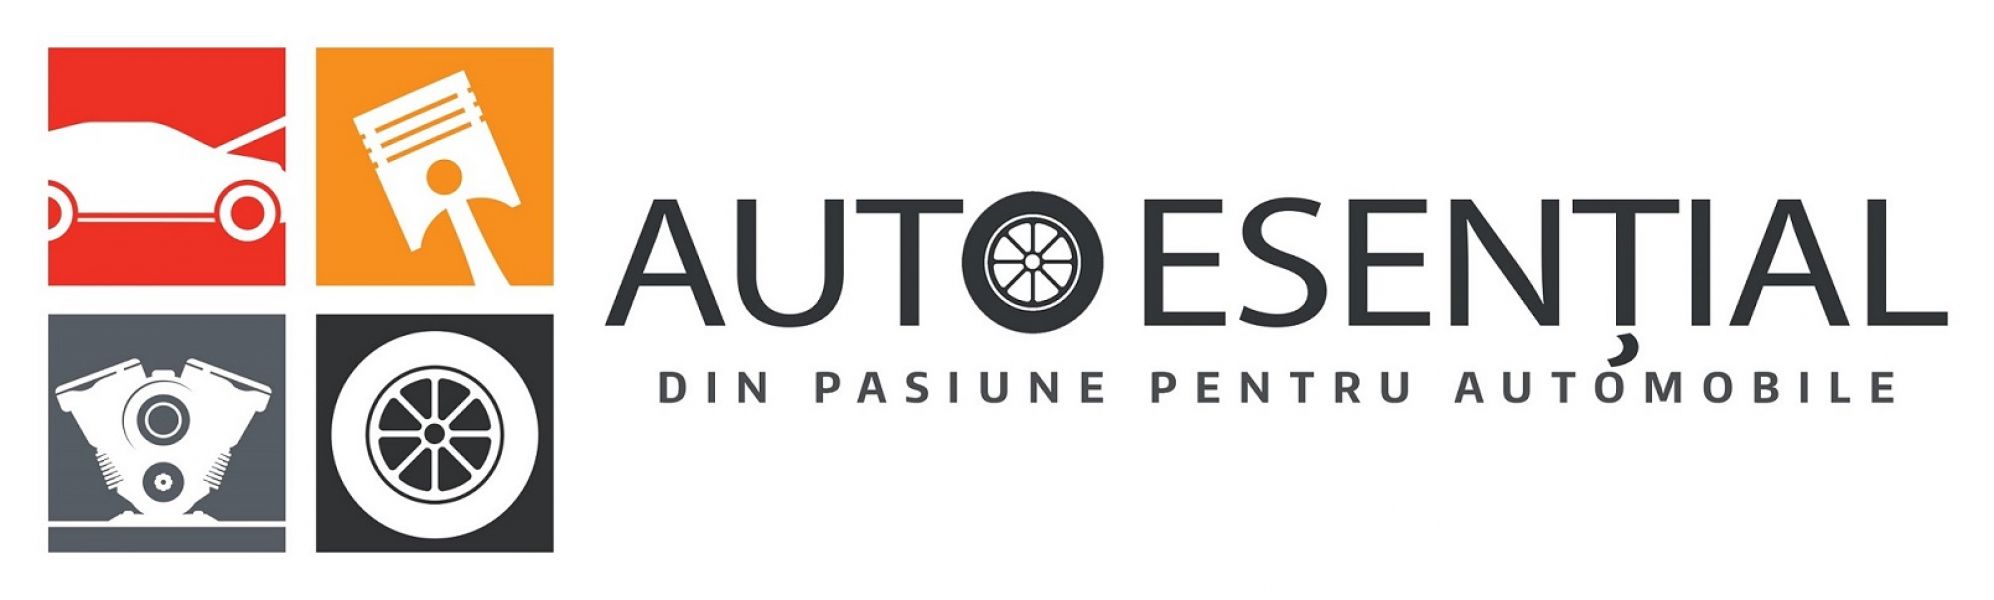 AutoEsential.ro - piese auto online